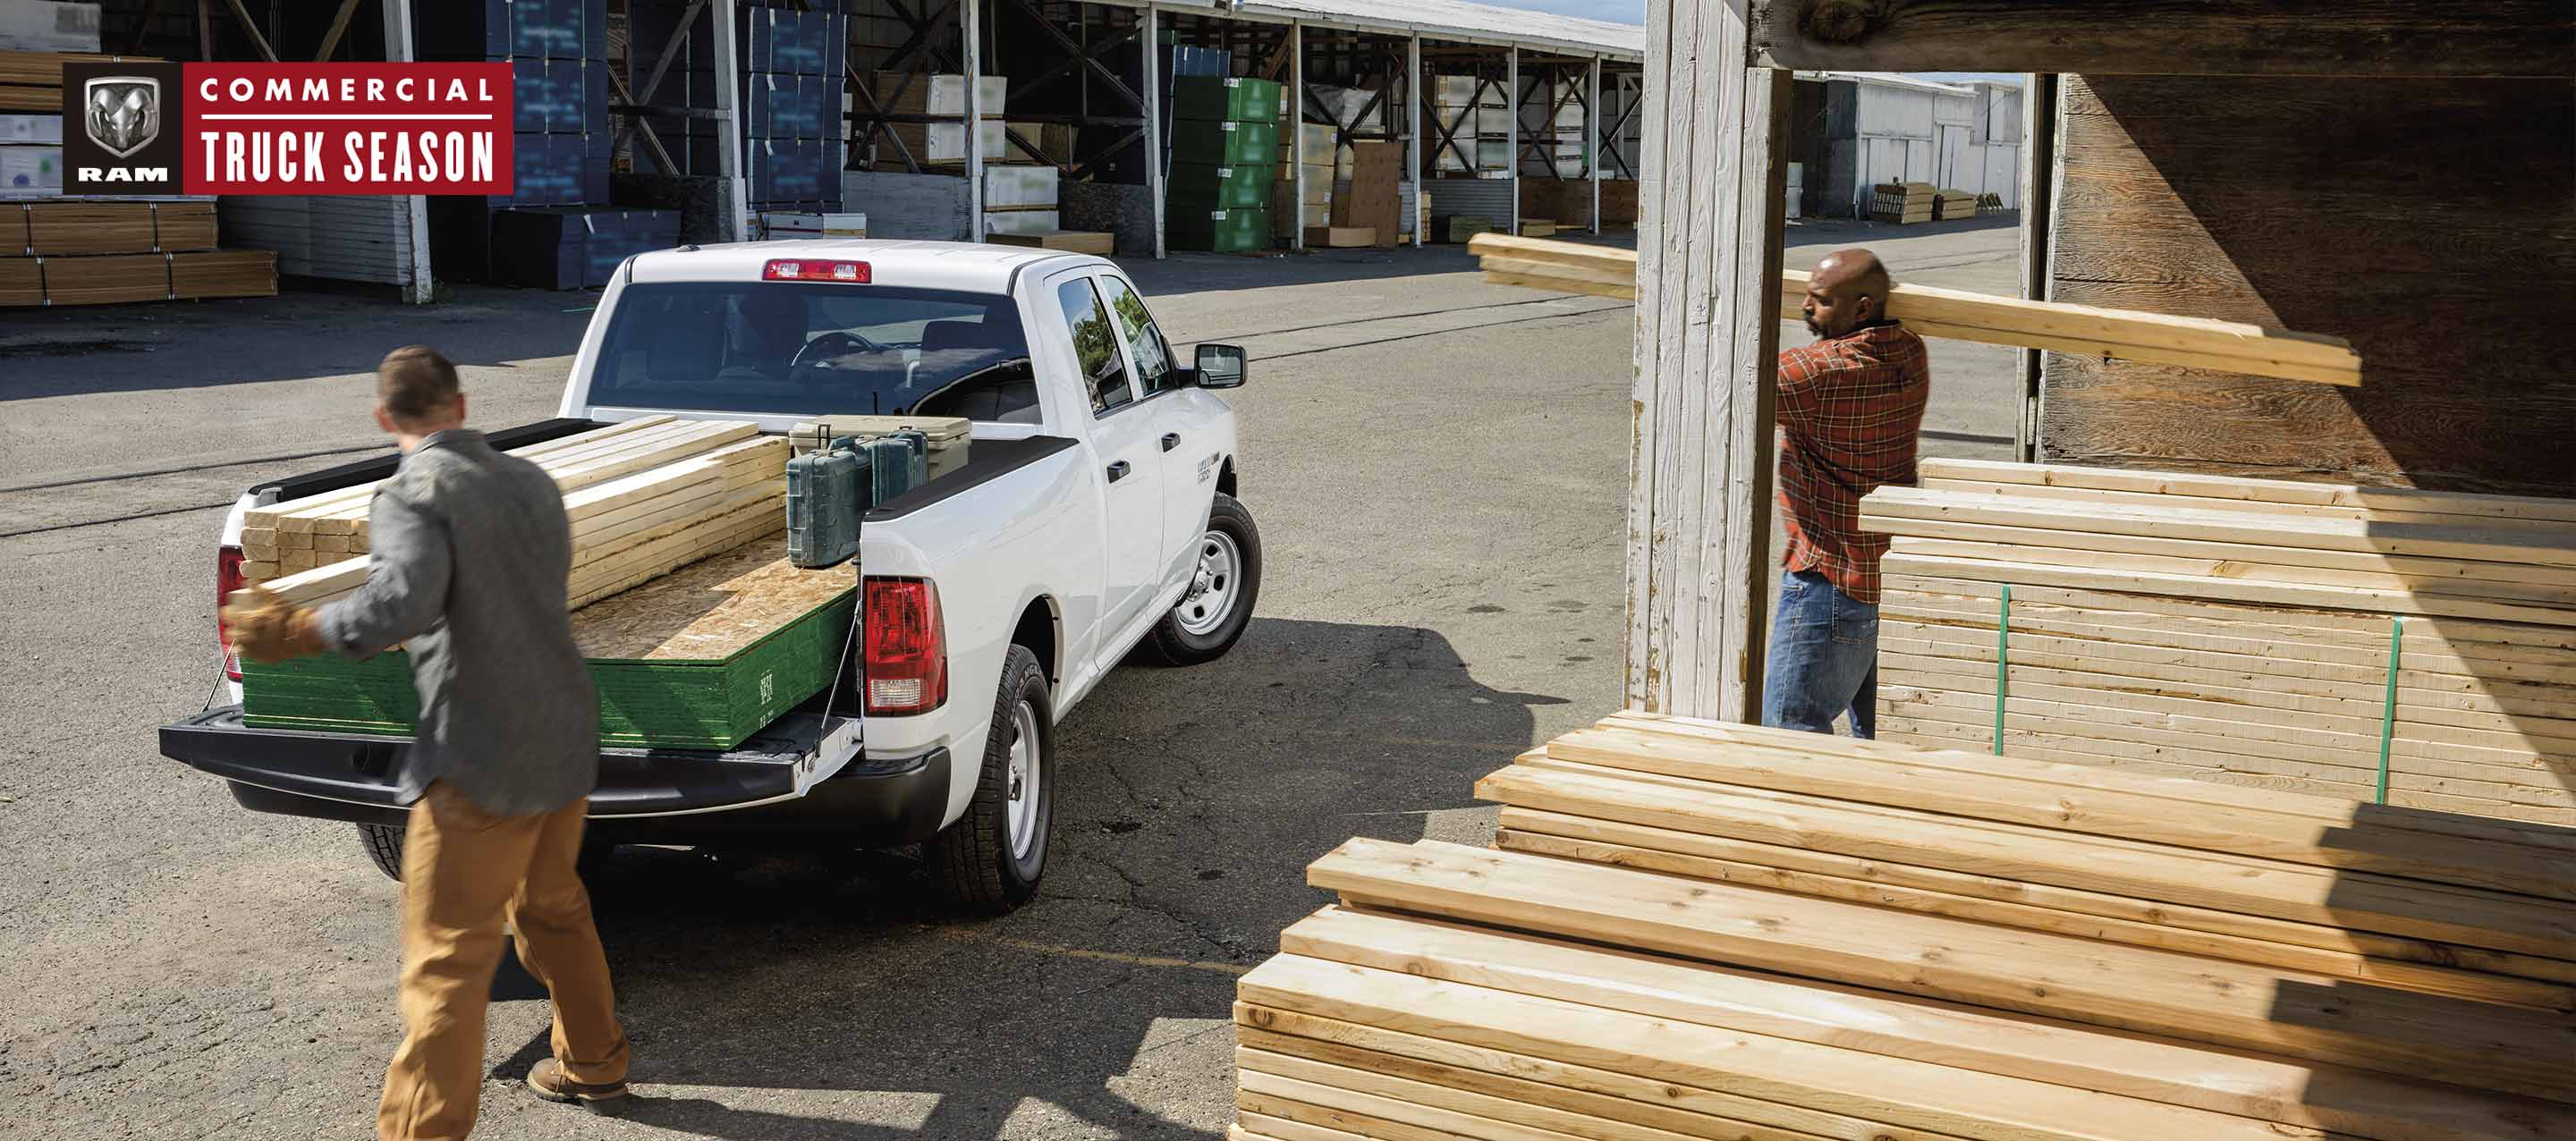 A man loading lumber into the pickup bed of a white 2023 Ram 1500 Classic Tradesman 4x4 Crew Cab. Ram Commercial Truck Season.